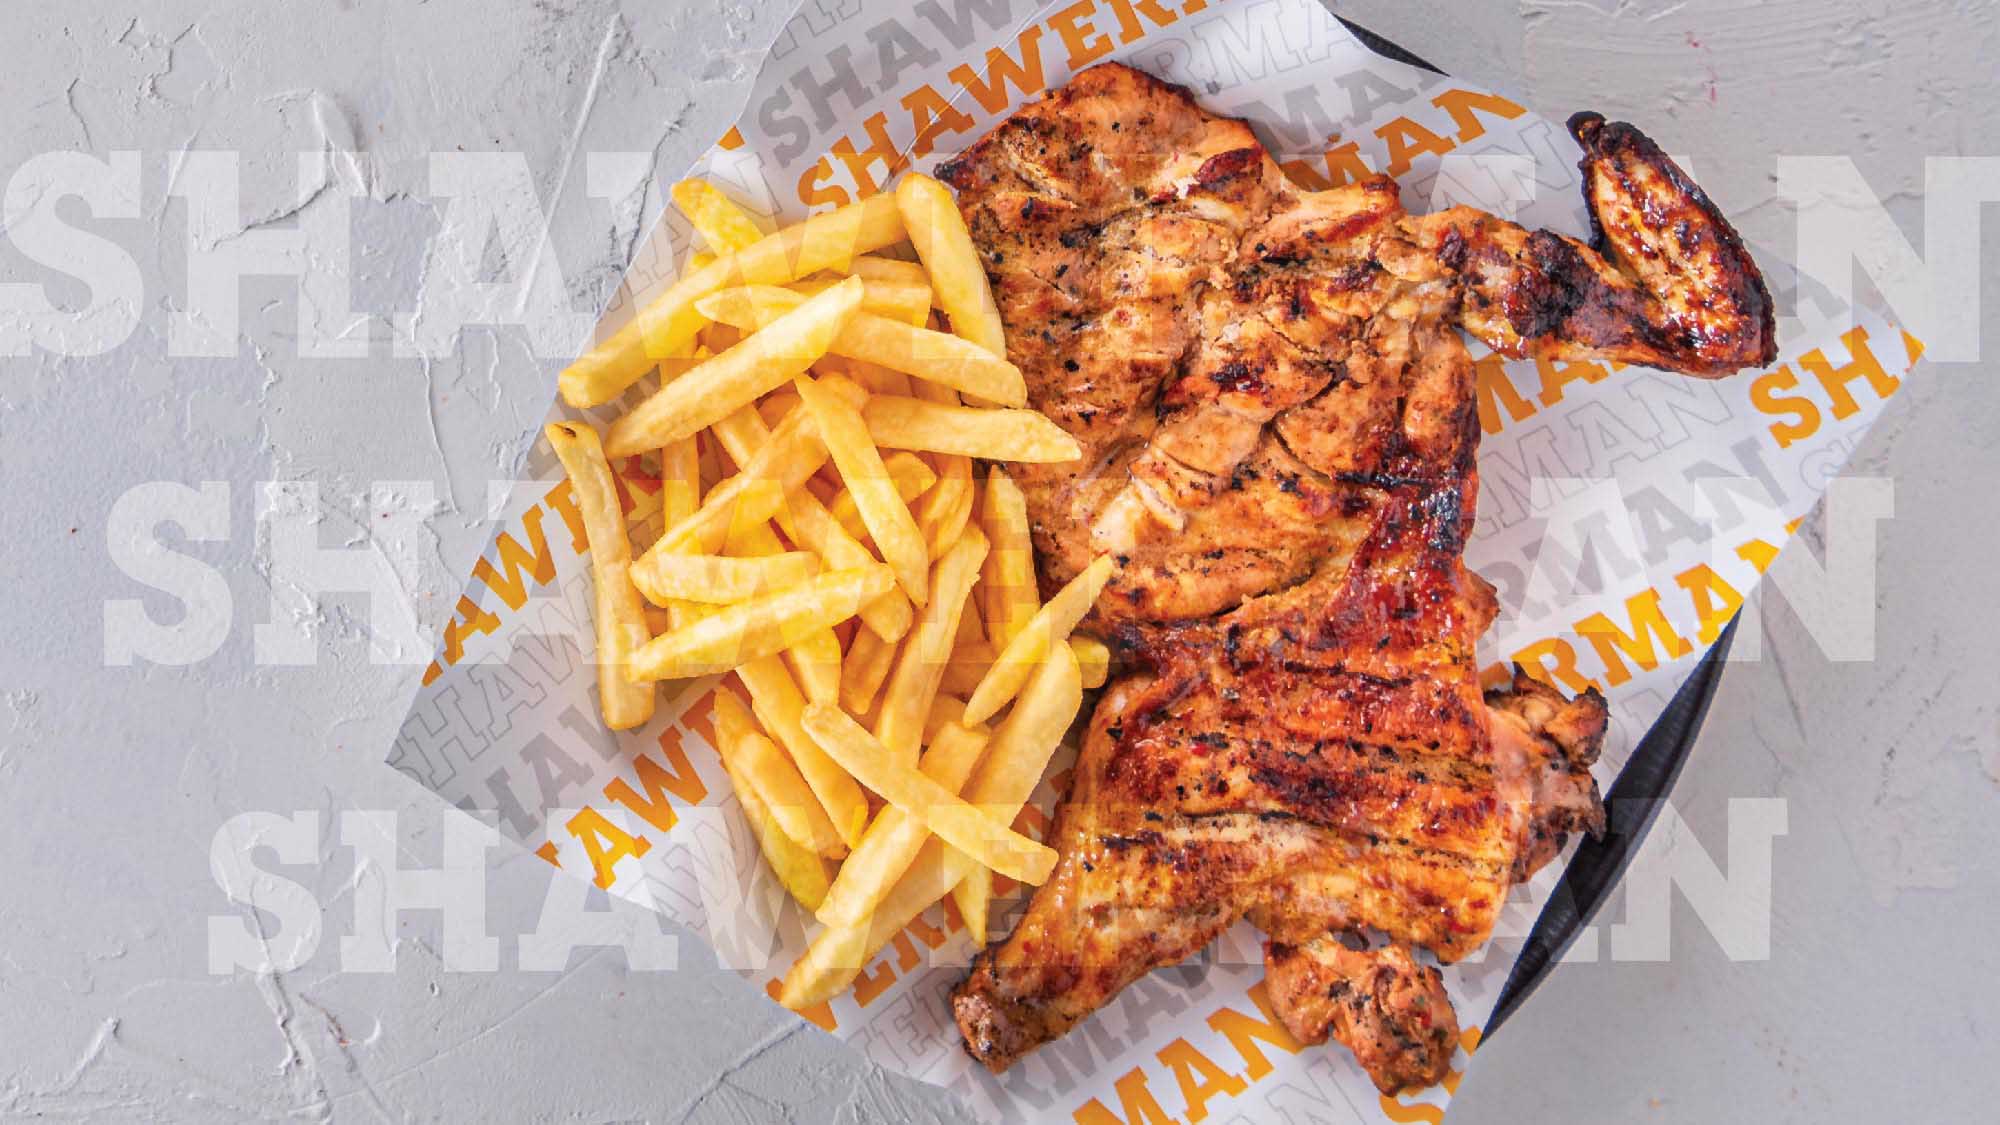 Shawerman – Savoring the Best Grilled and Charcoal Chicken in the UAE